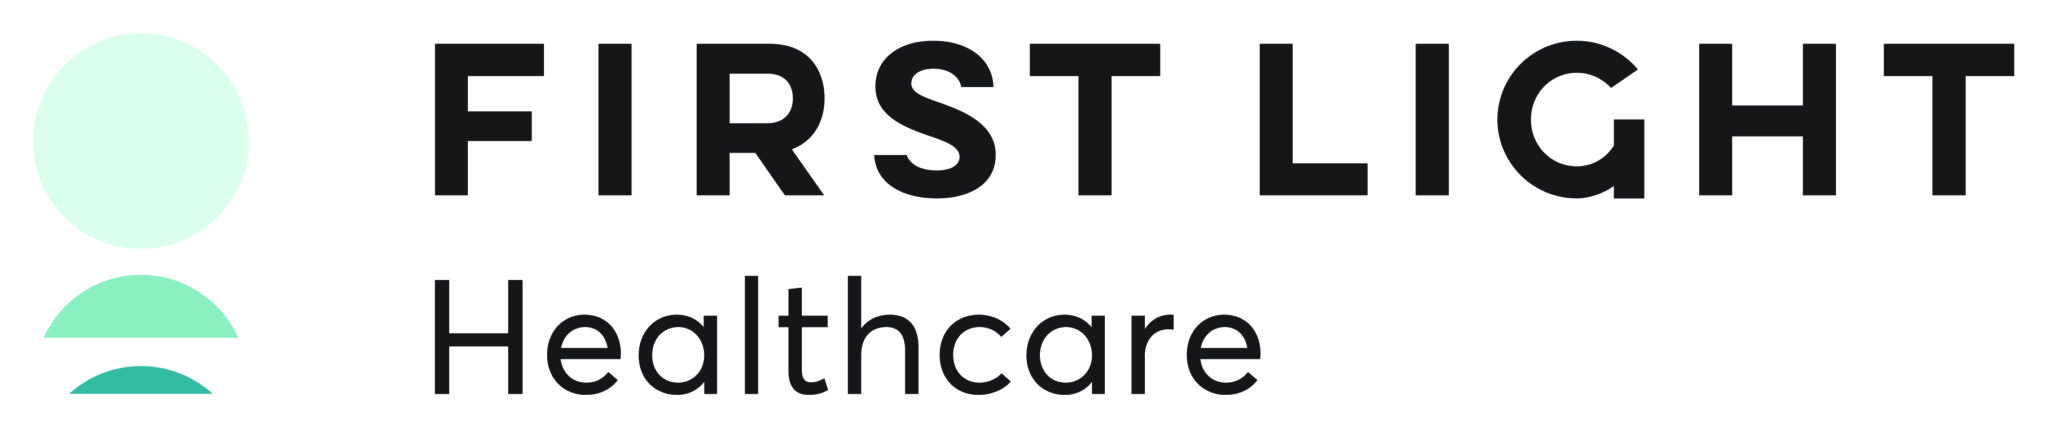 First Light Healthcare